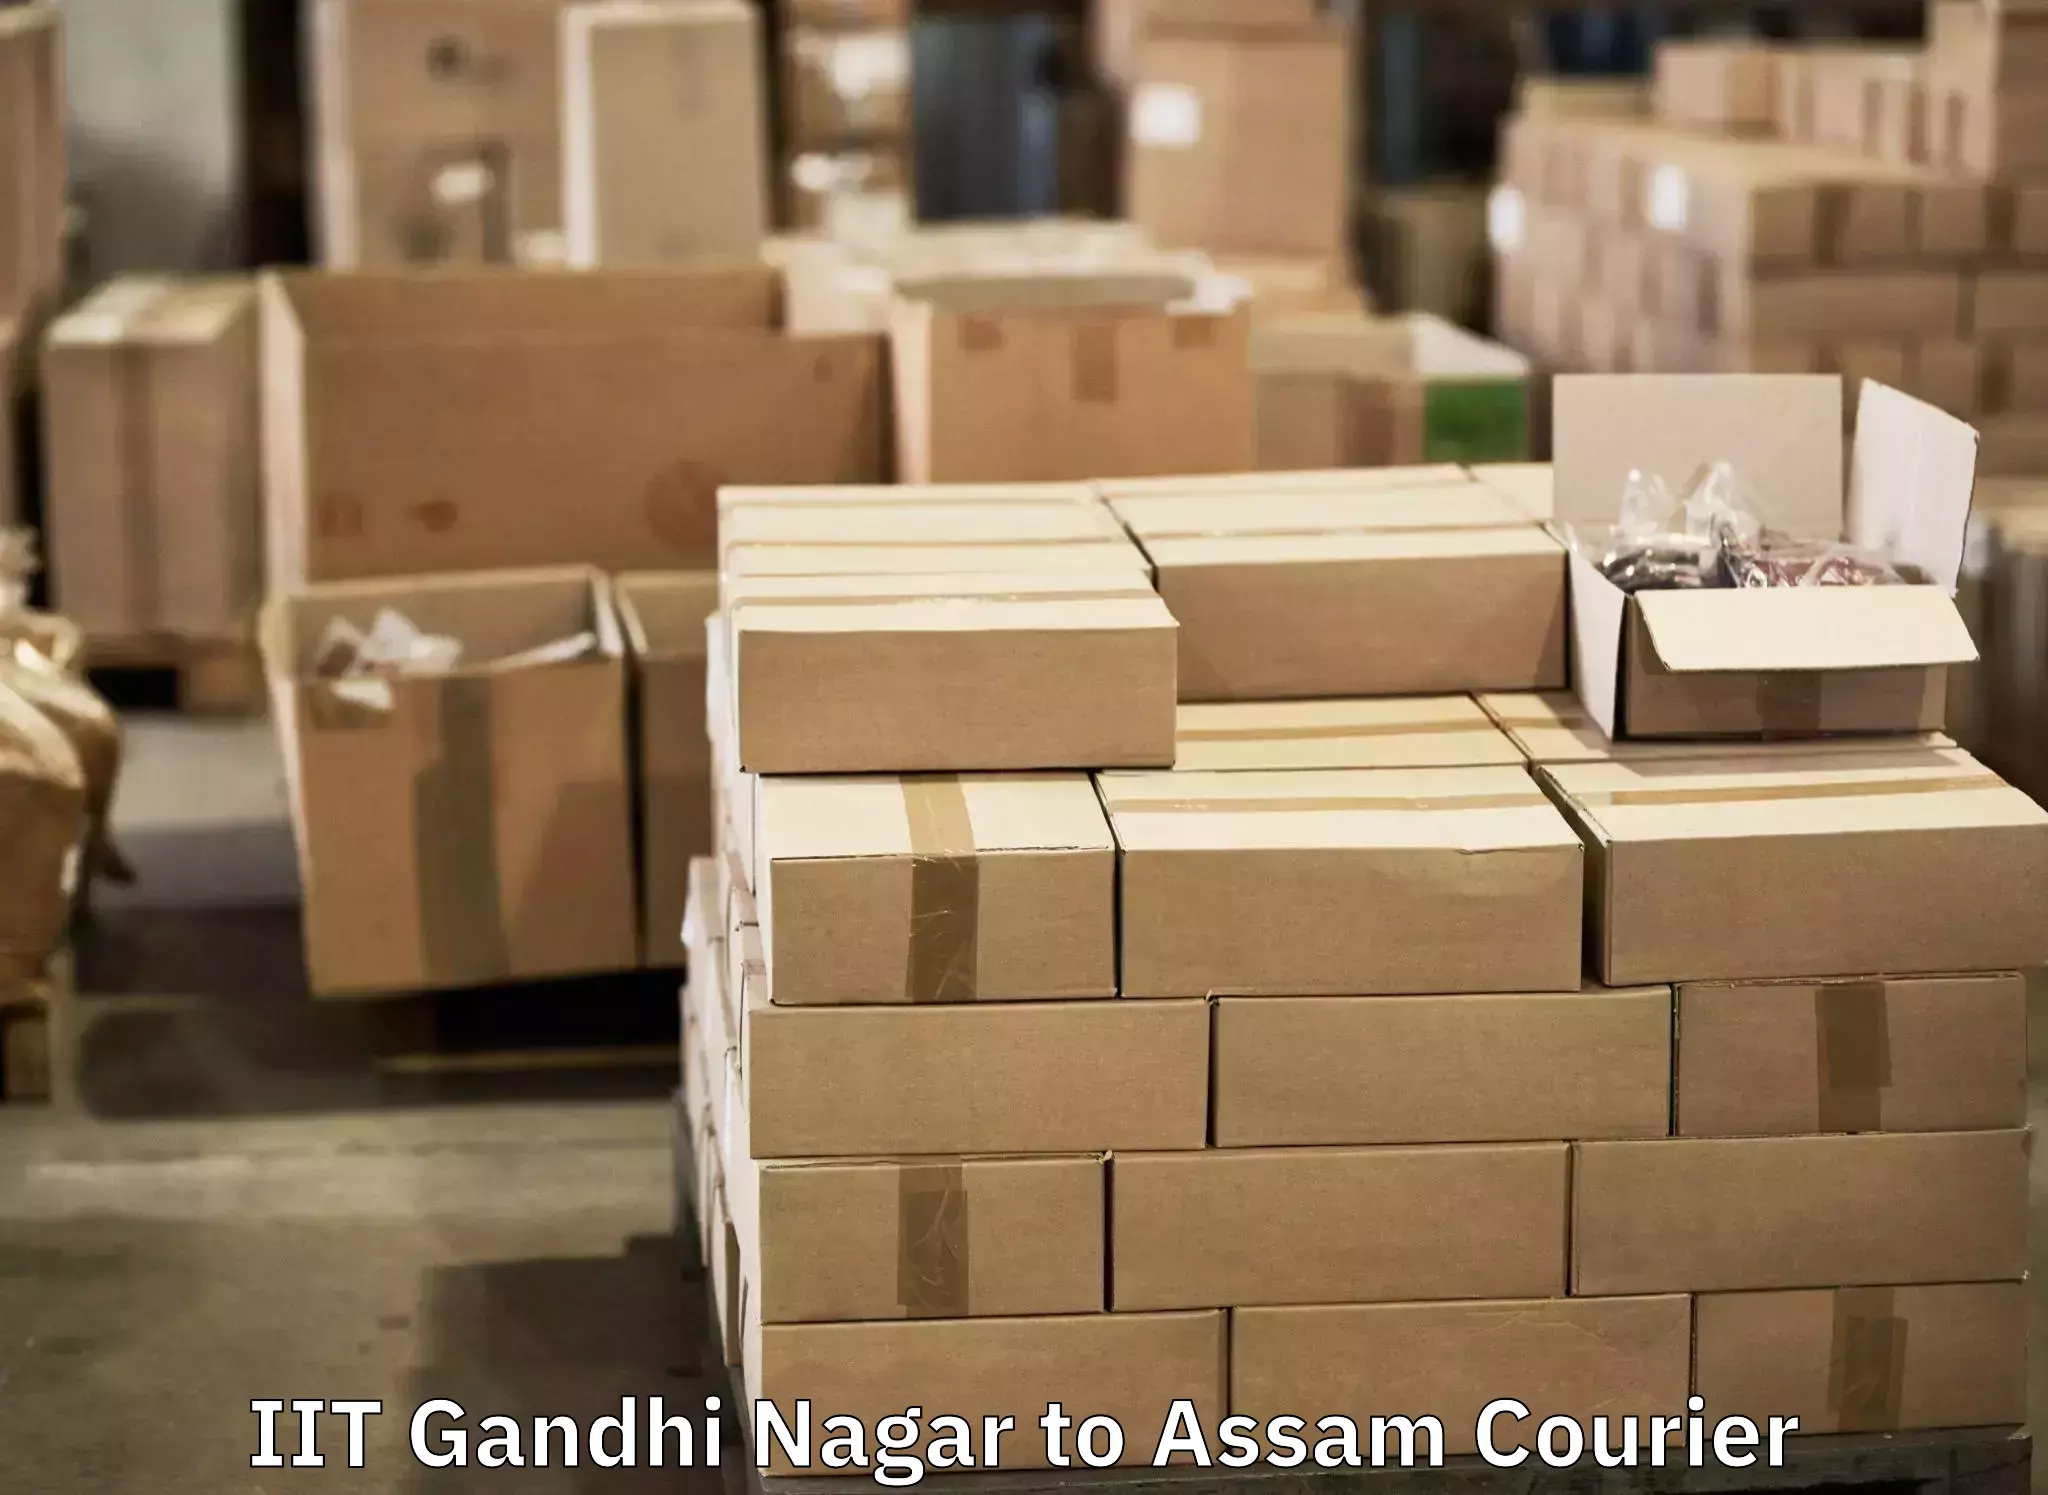 Luggage delivery system IIT Gandhi Nagar to Sonitpur